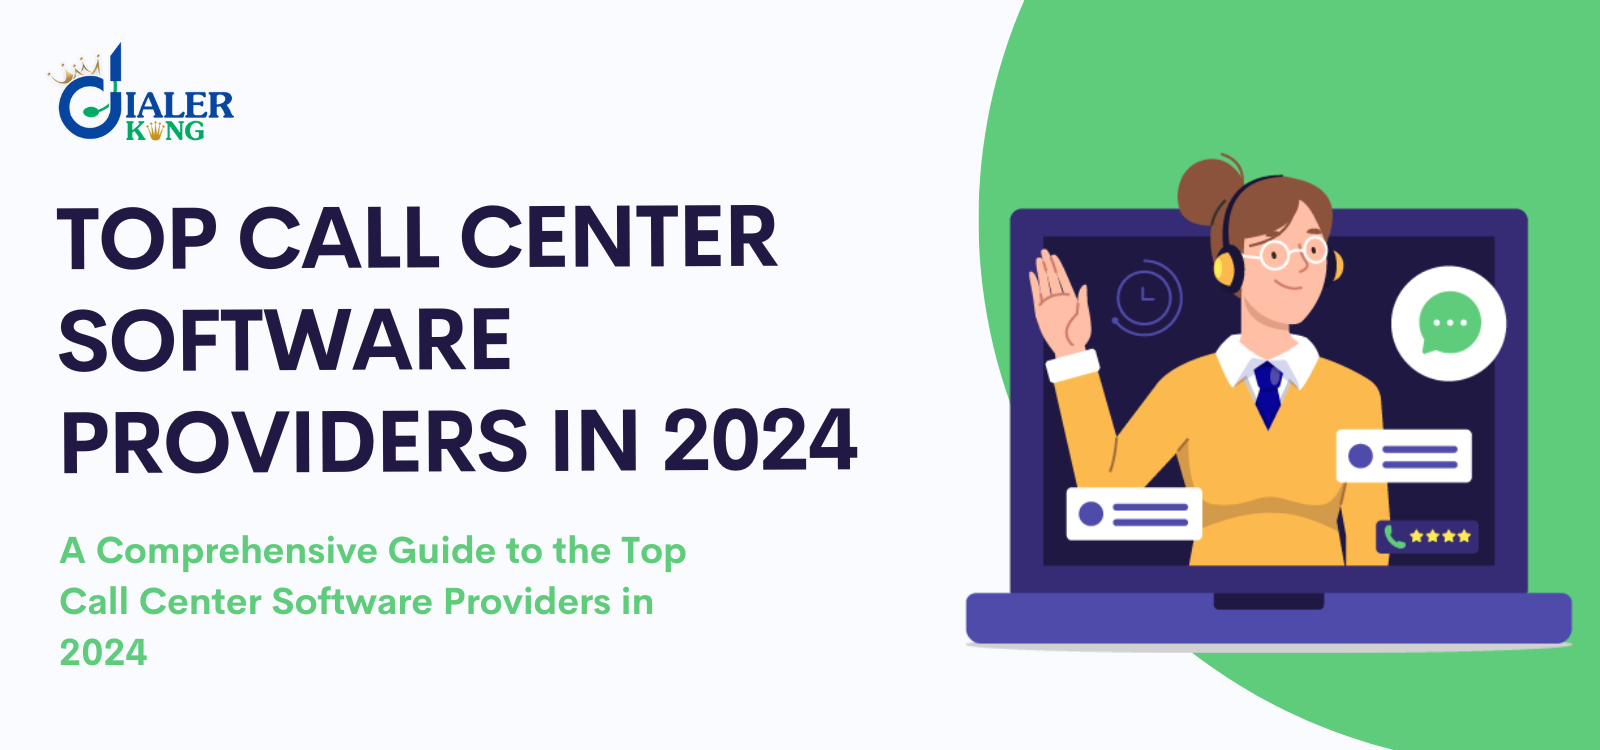 Top Call Center Software Providers in 2024